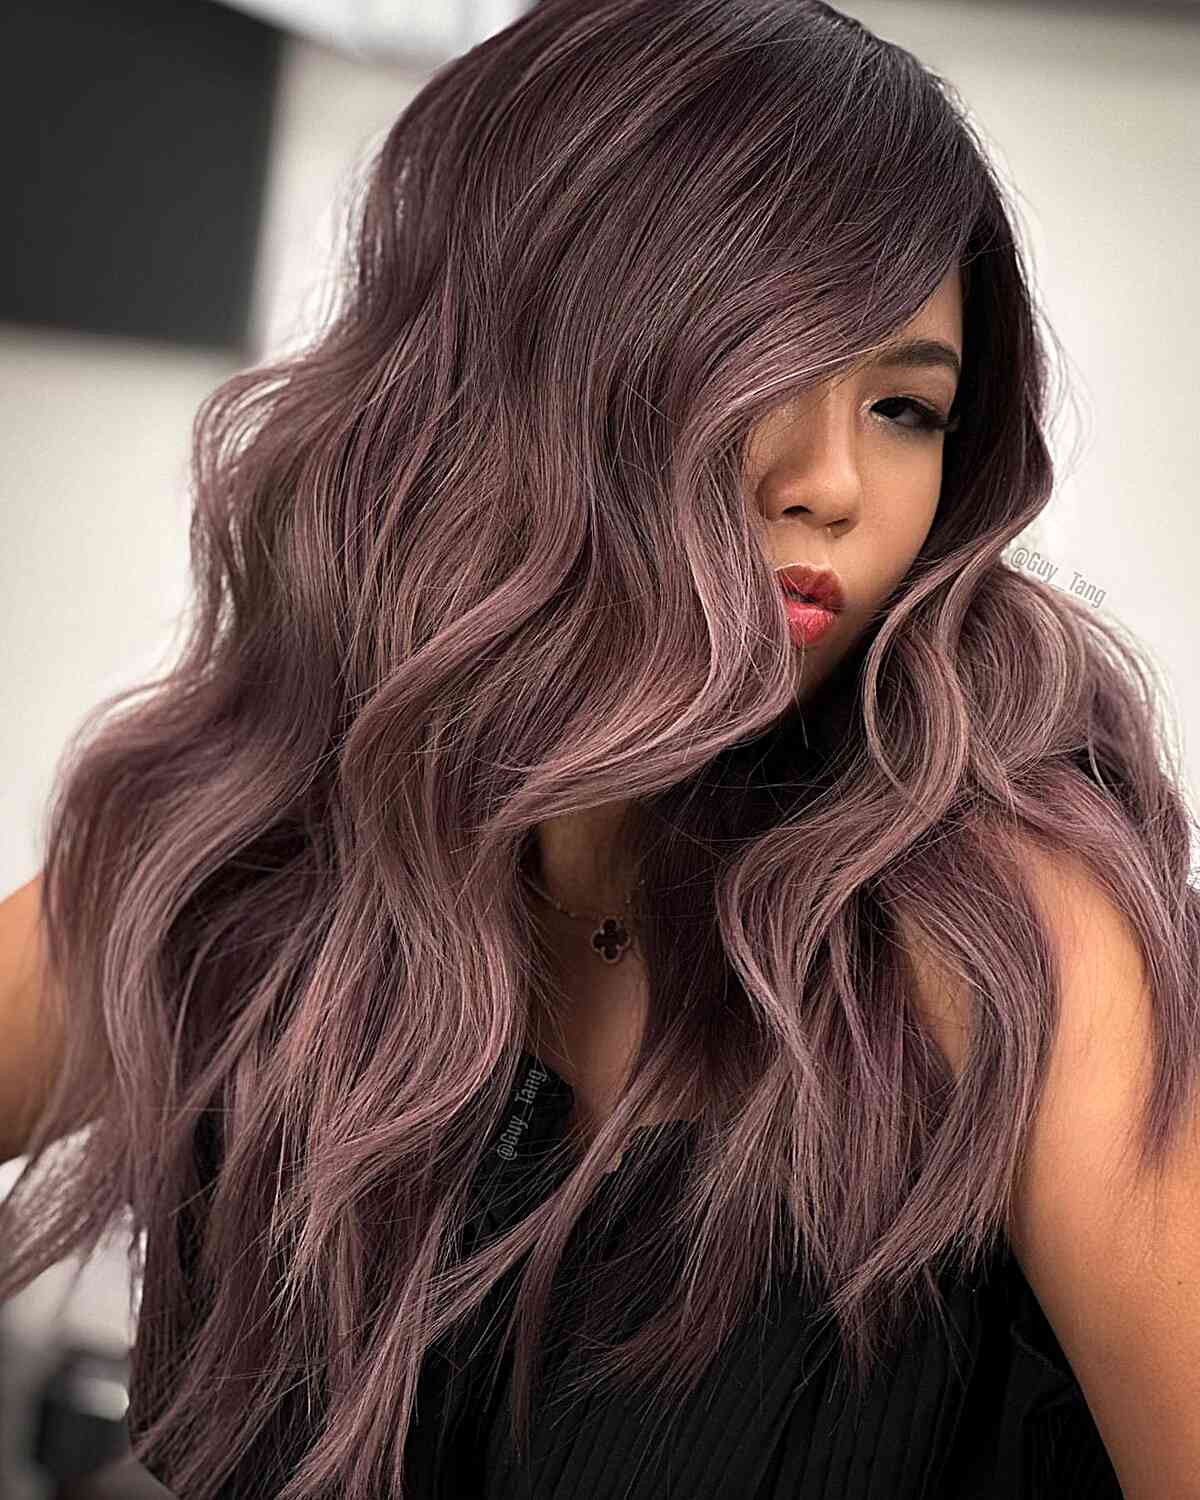 Dusty Lilac Hair Color Idea for long hair with waves